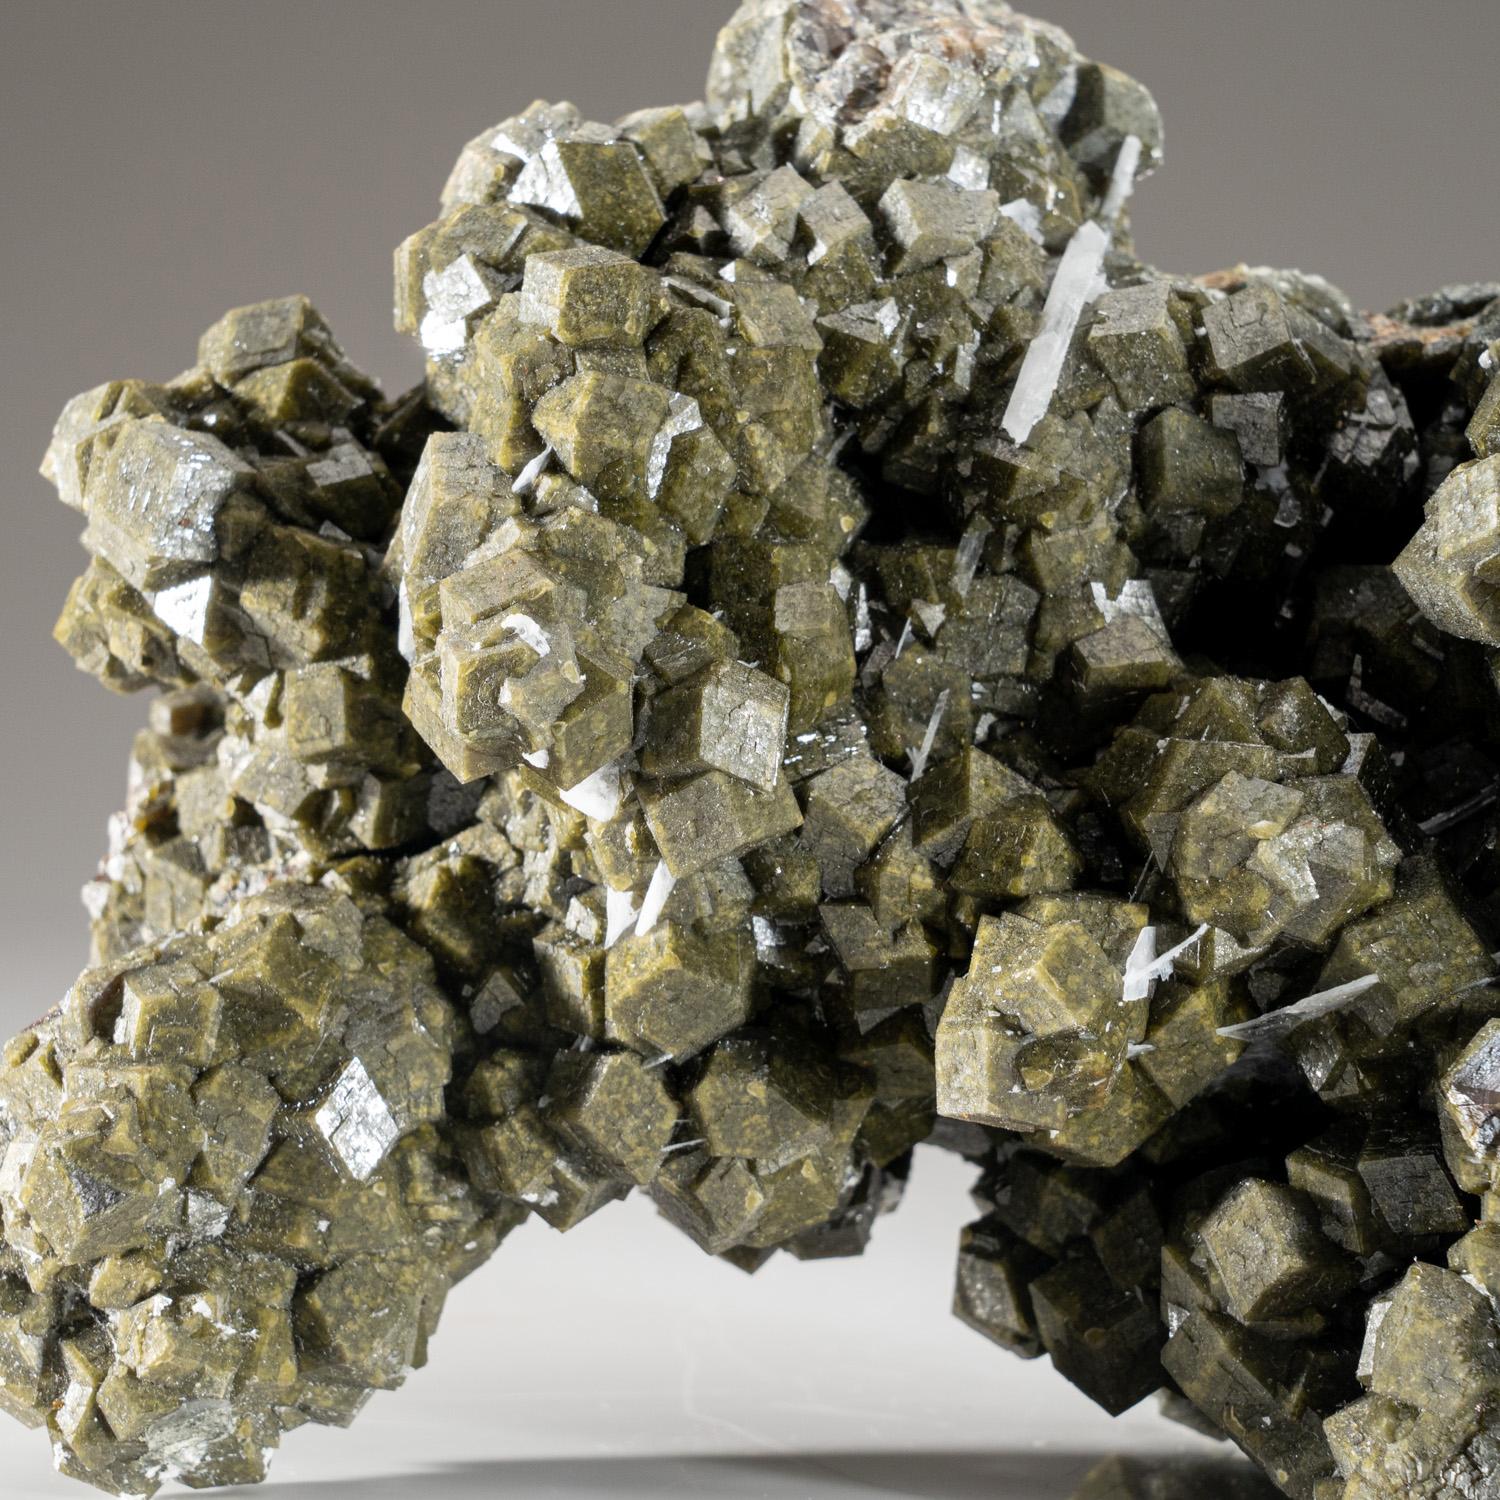 From Stanley Butte, San Carlos Indian Reservation, Graham County, Arizona
Well crystallized, classic cluster of greenish-brown andradite garnet crystals covering both sides. A classic specimen, no damage.

 

Weight: 5.2 lbs, Dimensions: 8 x 5.5 x